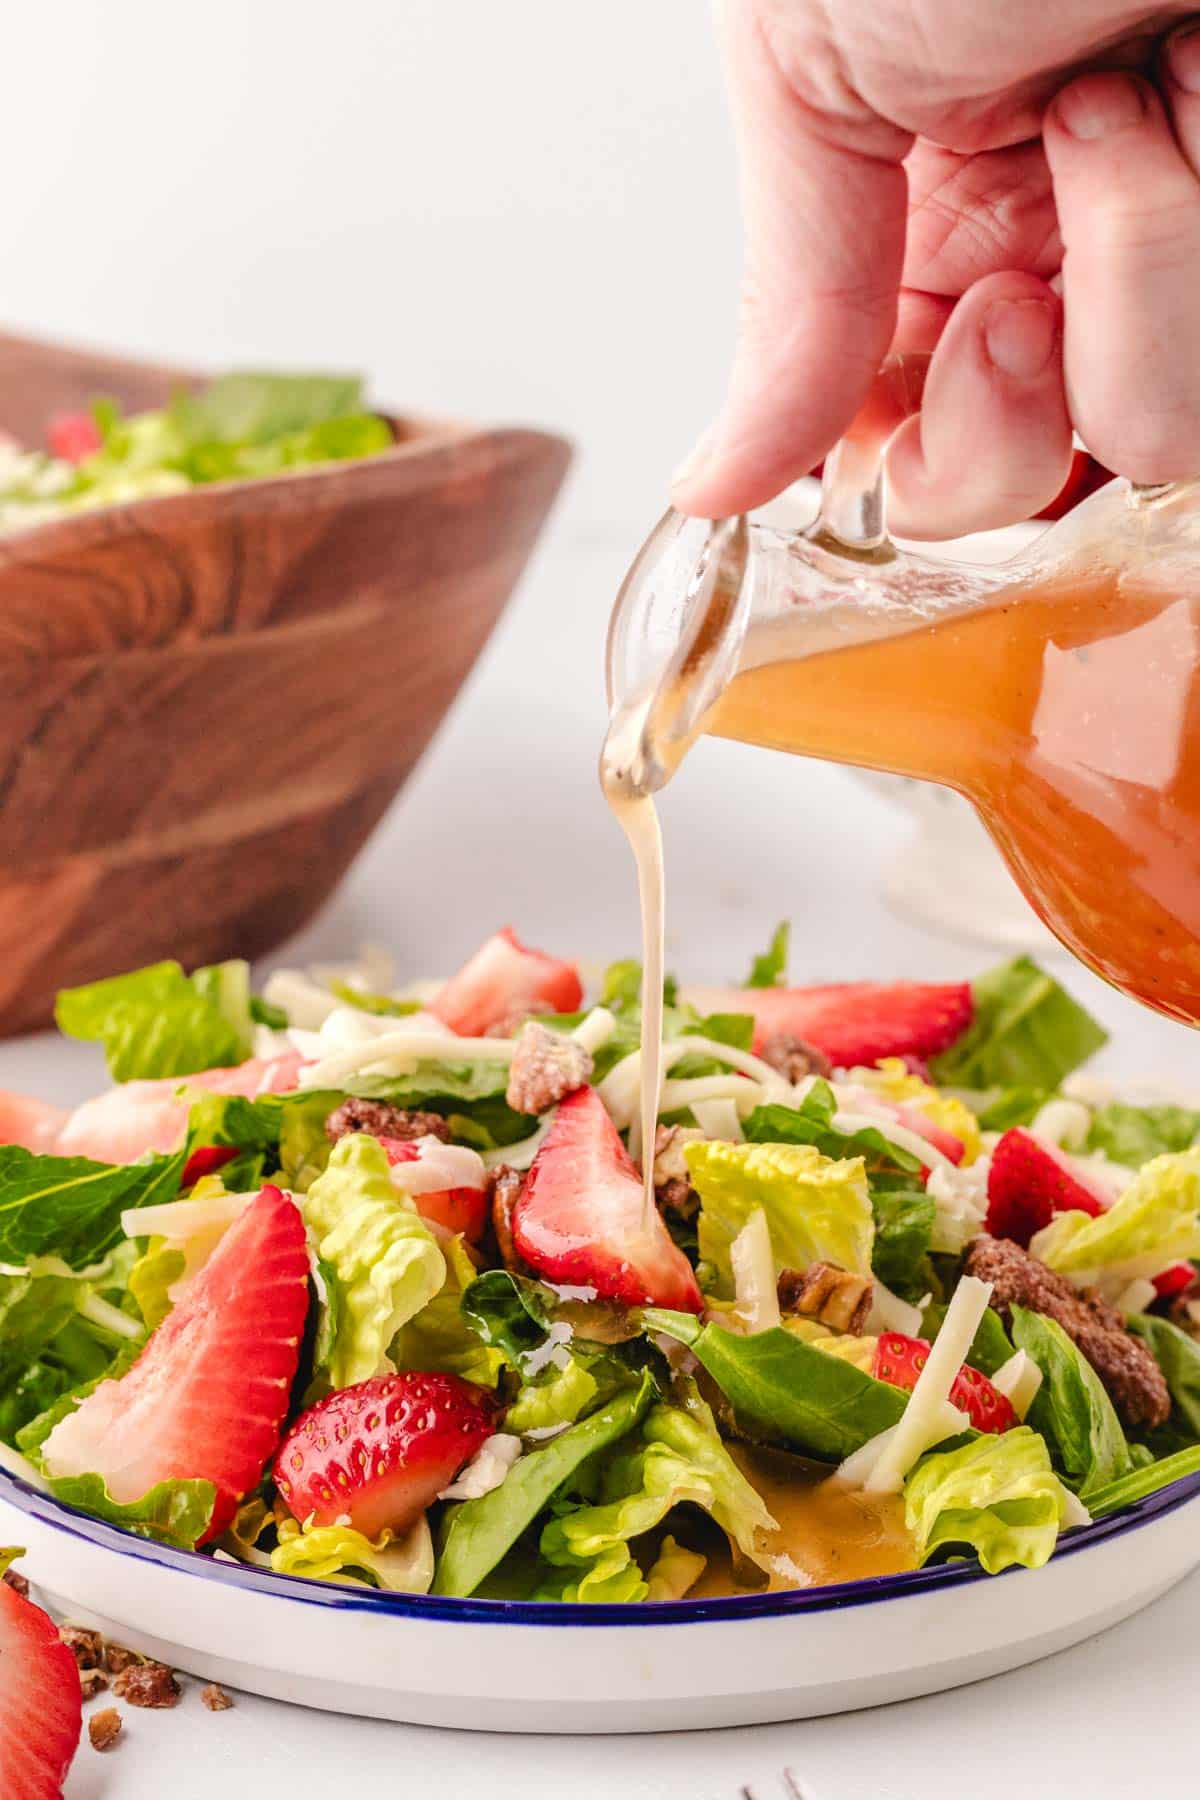 Pouring honey red wine dressing on a strawberry salad.